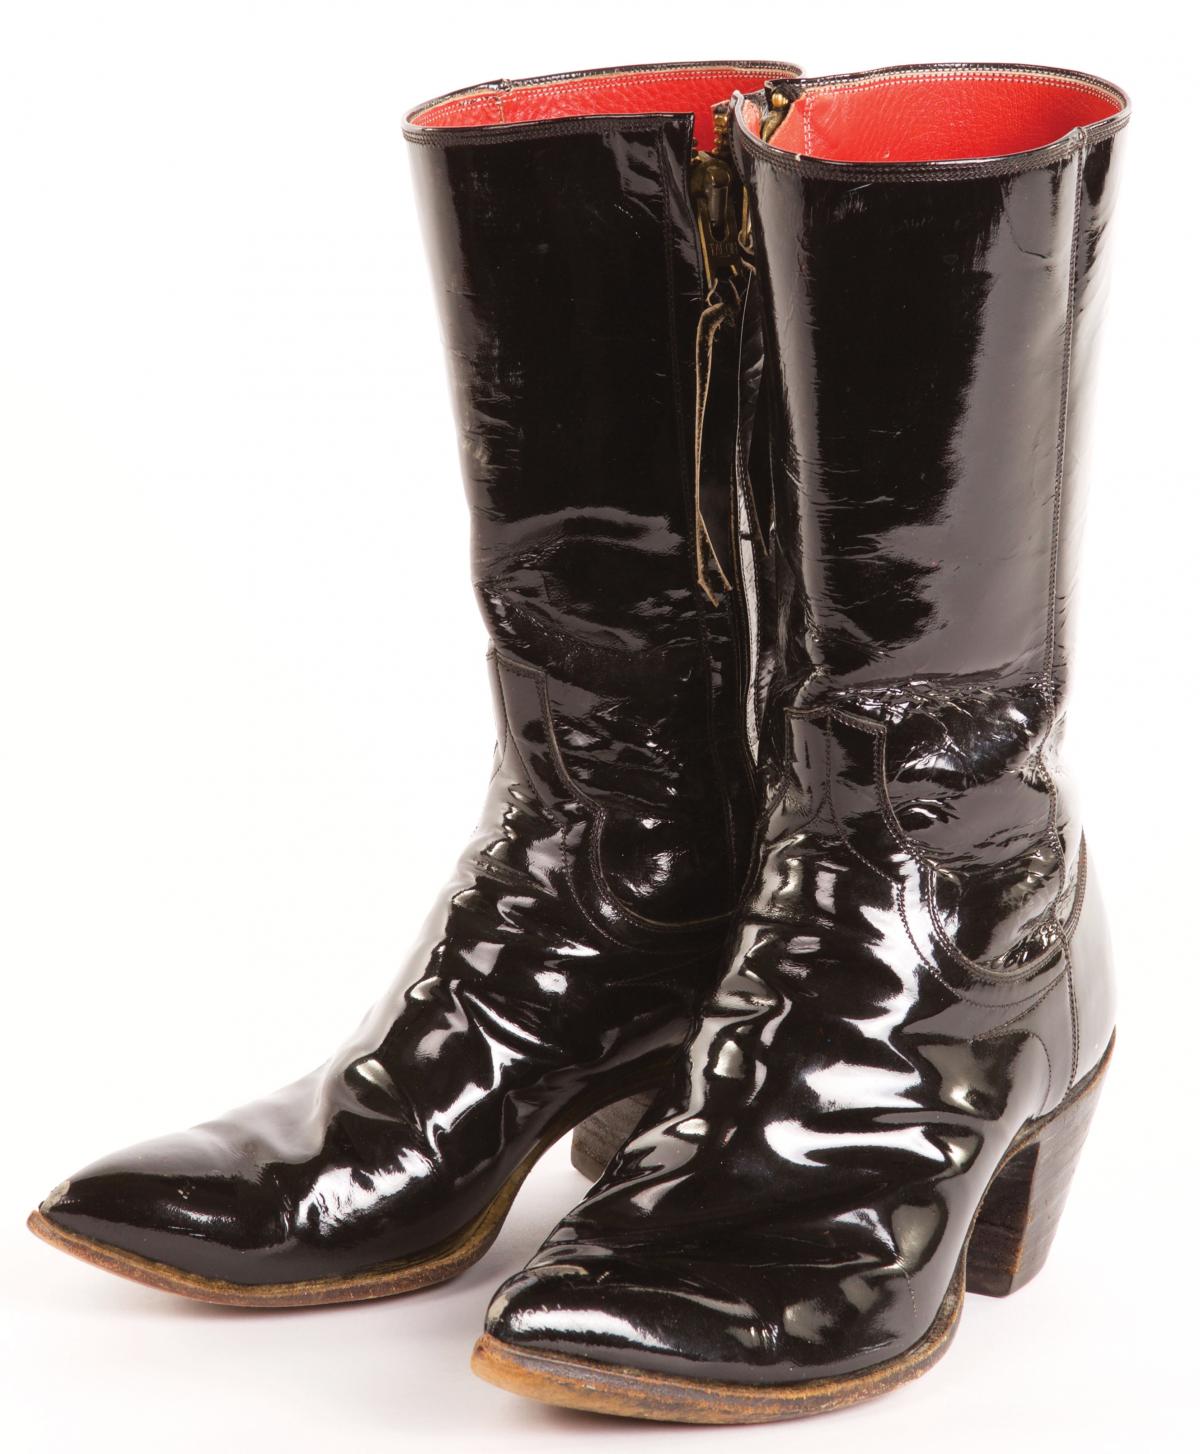 Phillips’s trademark patent leather boots